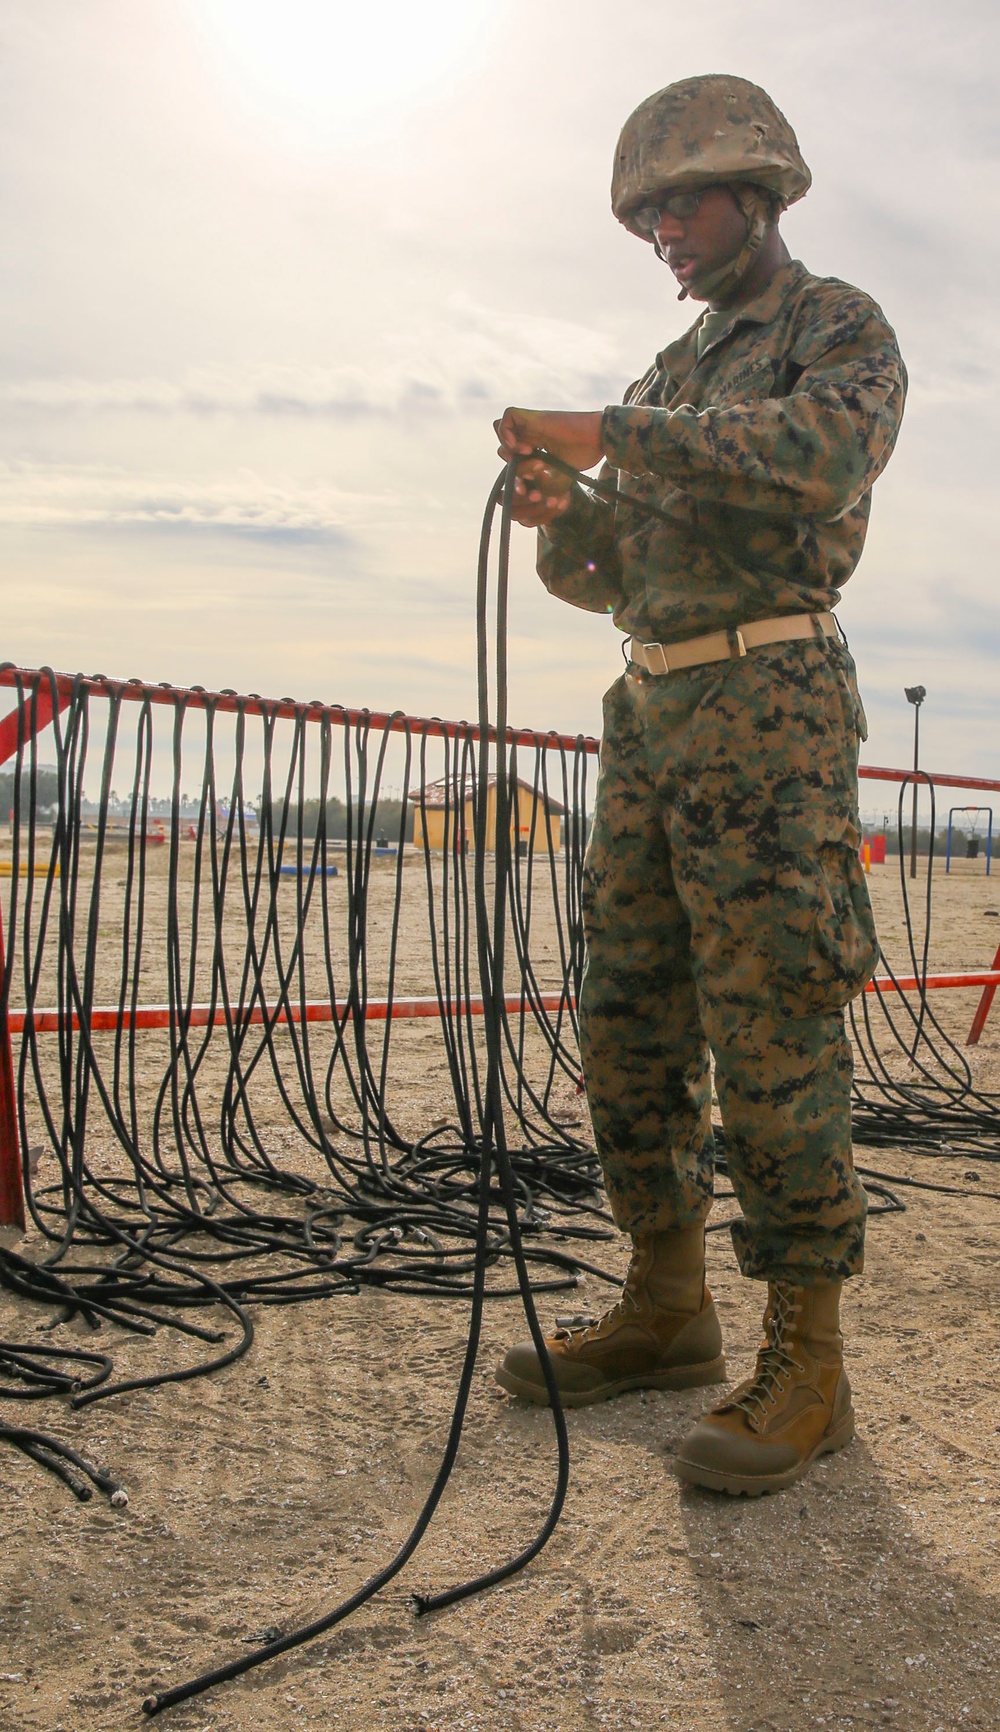 New Marine leaves financial issues behind